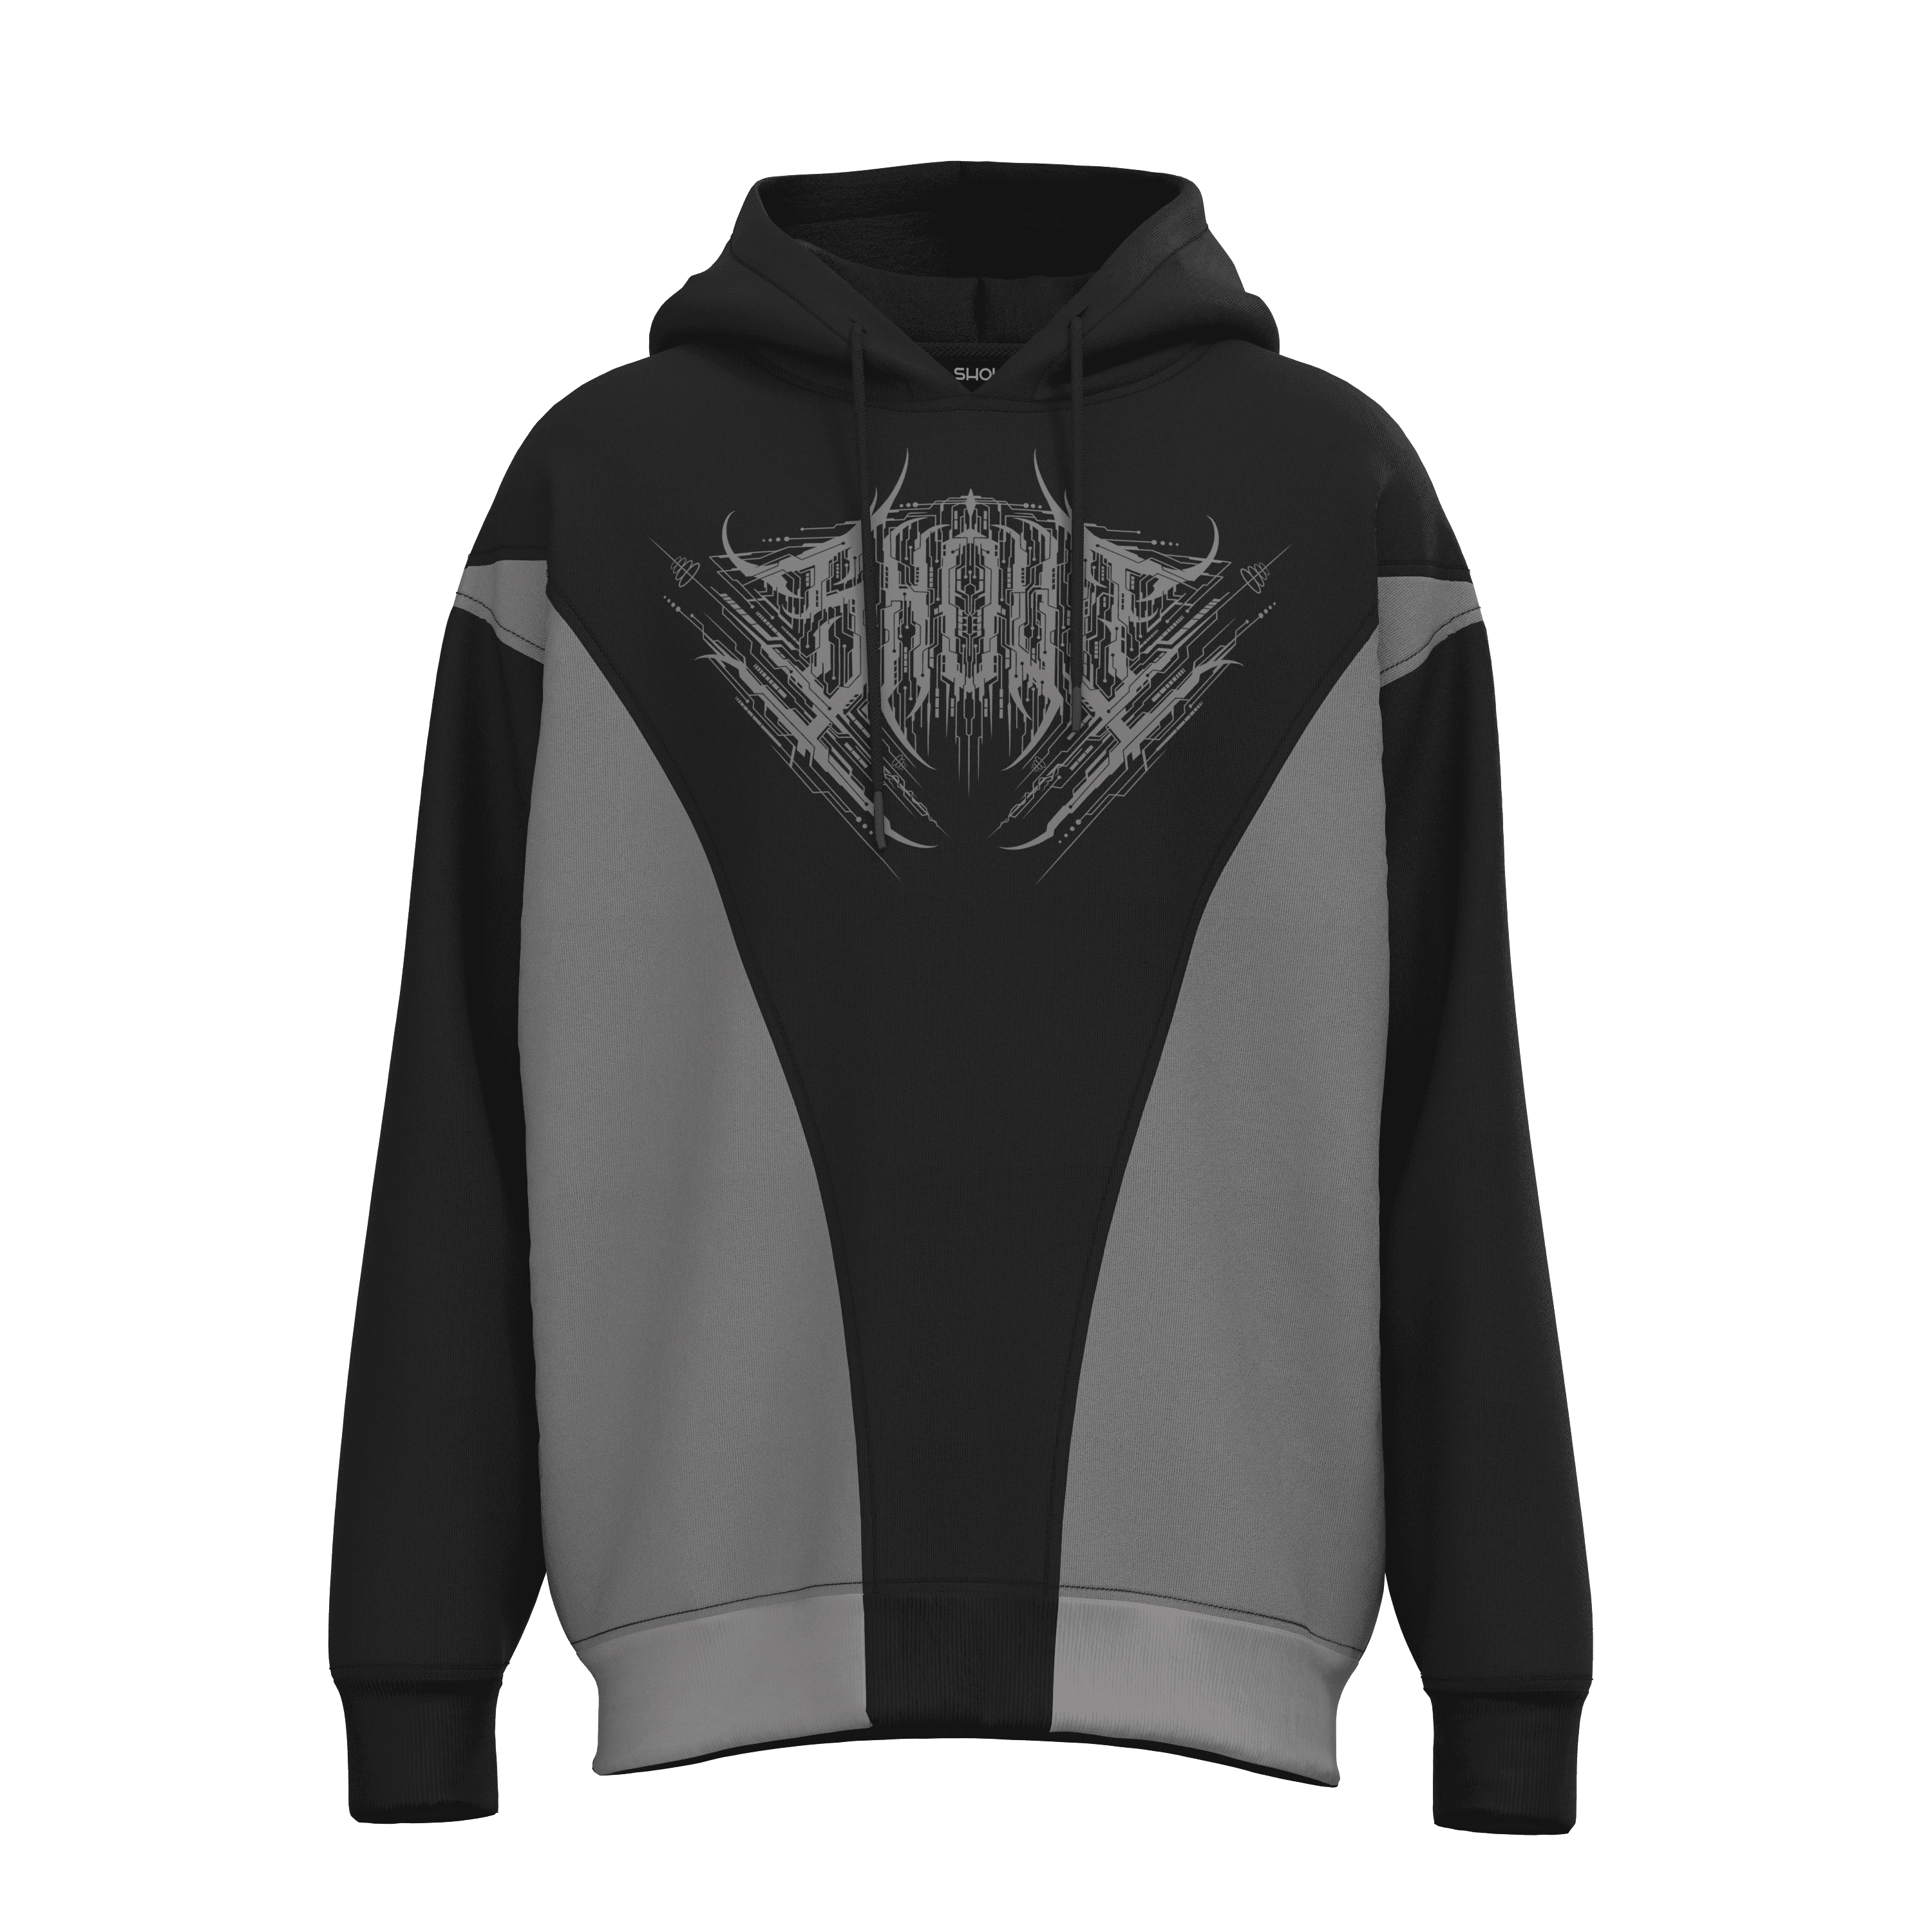 Shout Limited Edition Oversize Technical Logo Unisex Hoodie